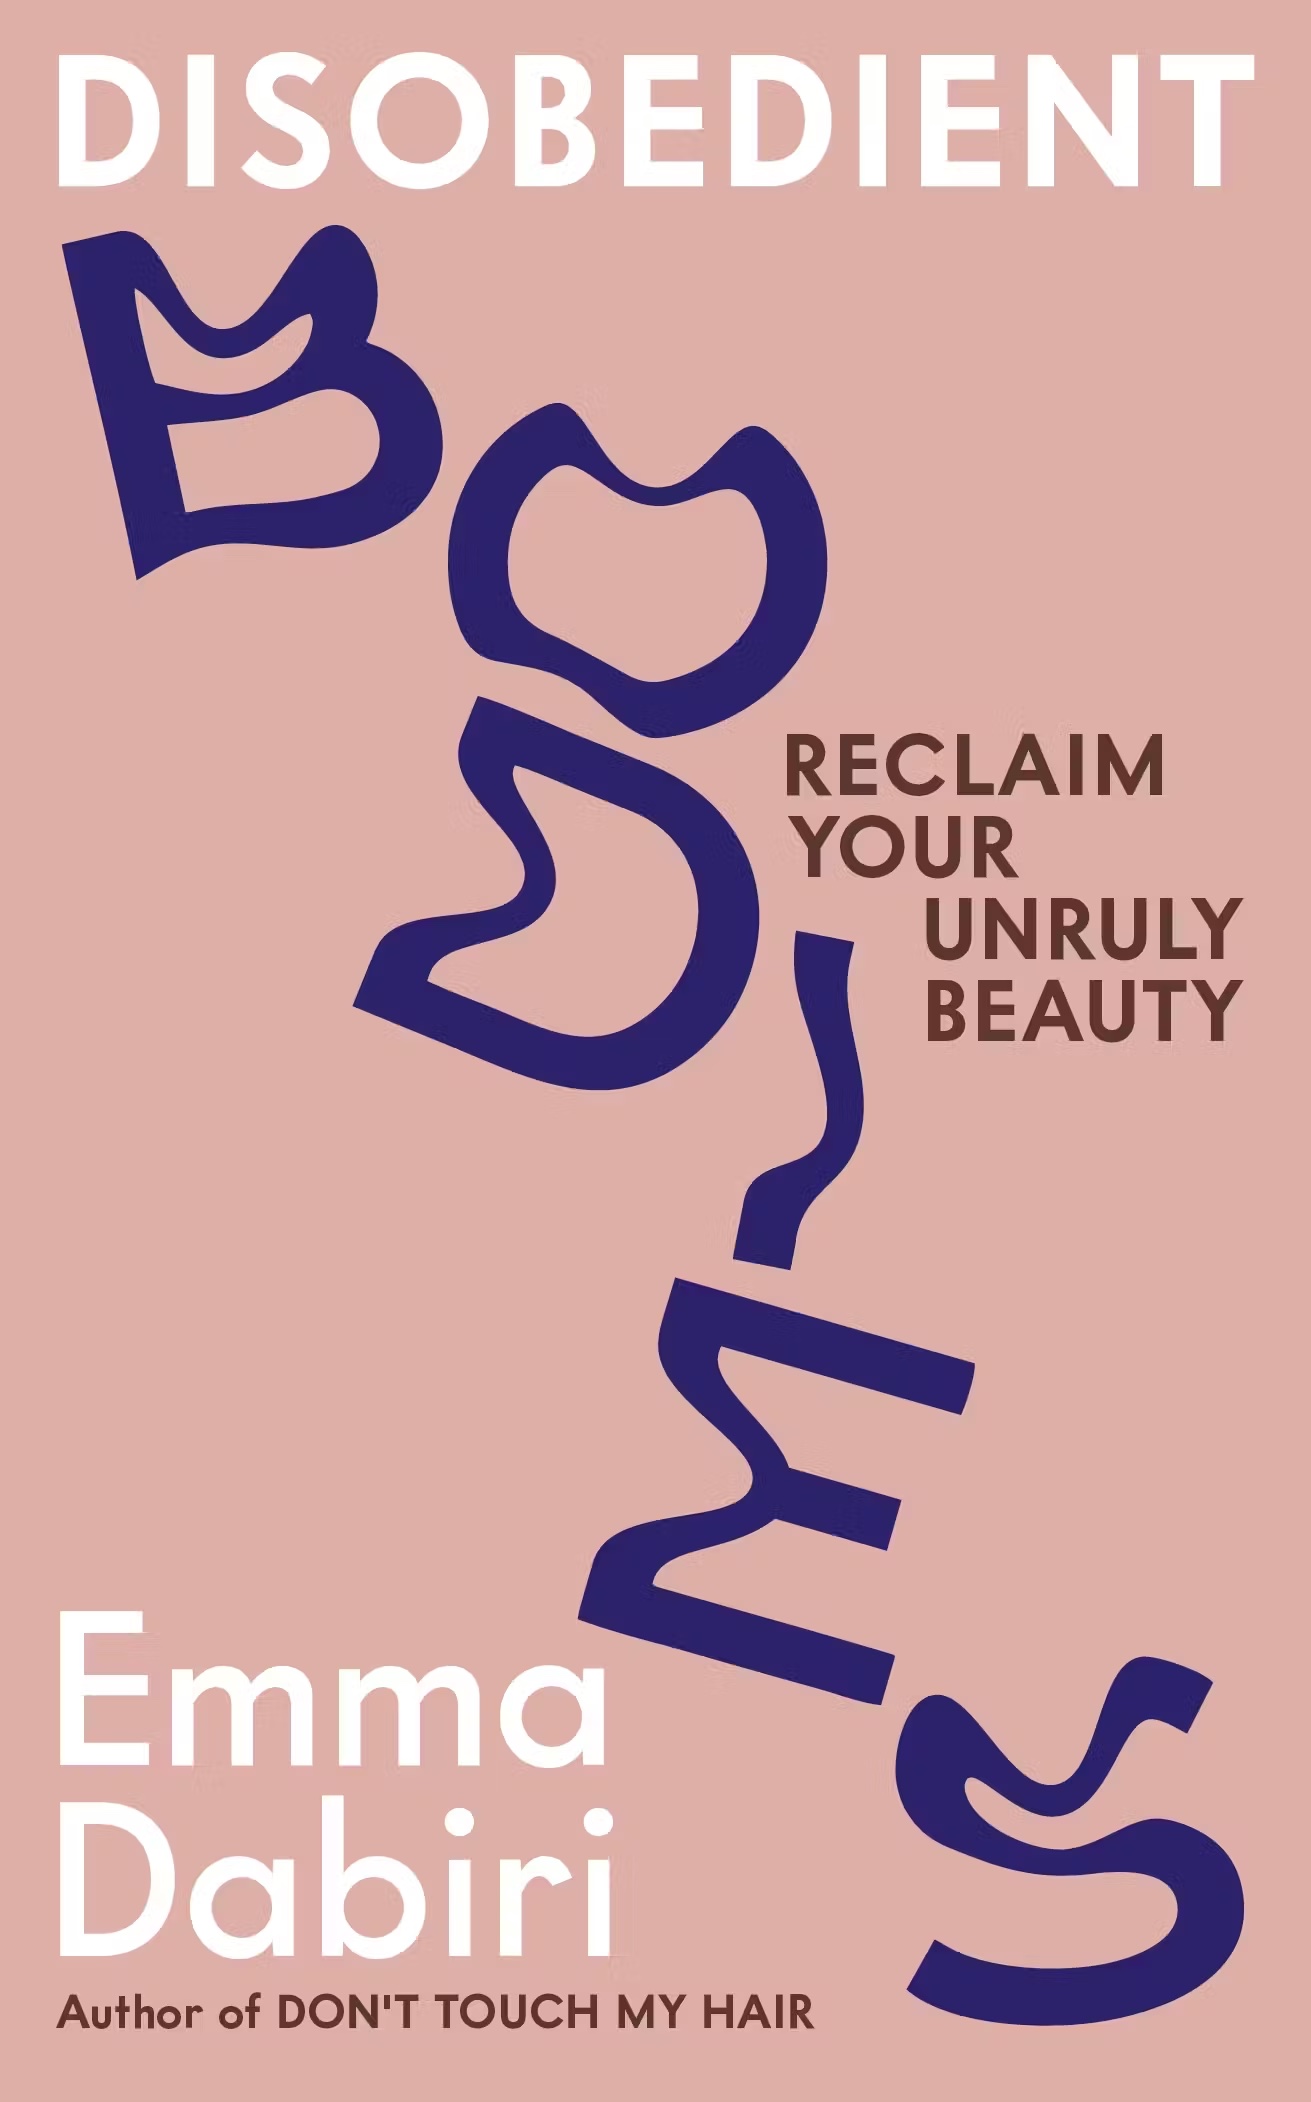 The Wick - Disobedient Bodies: Reclaim Your Unruly Beauty by Emma Dabiri
